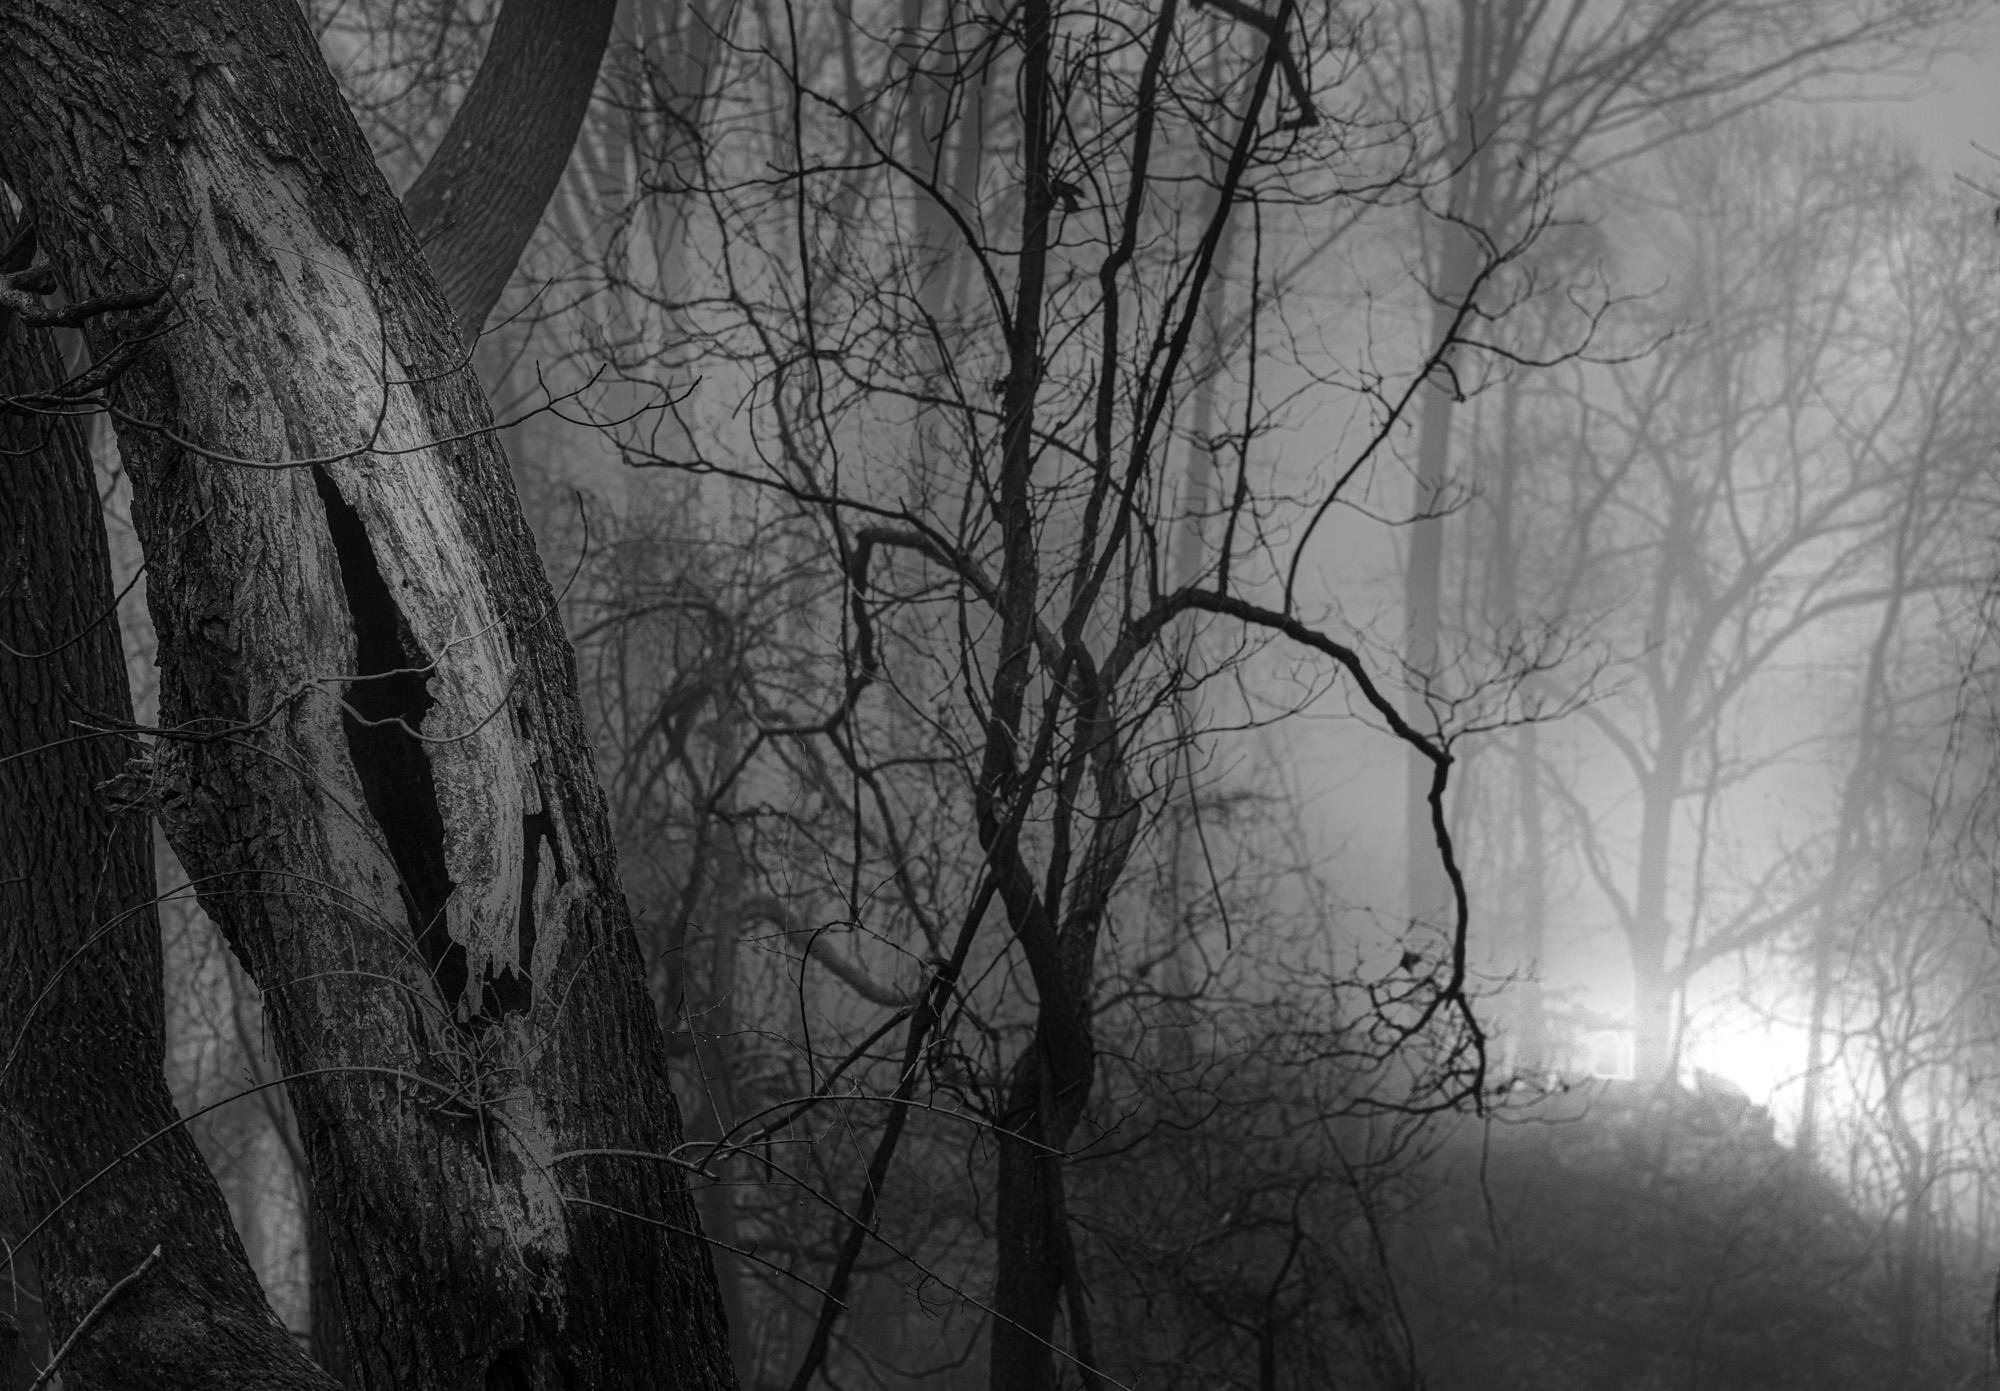 Howard Lewis Landscape Photograph -  Night Landscape Black and White Photograph "Mystery Woods"